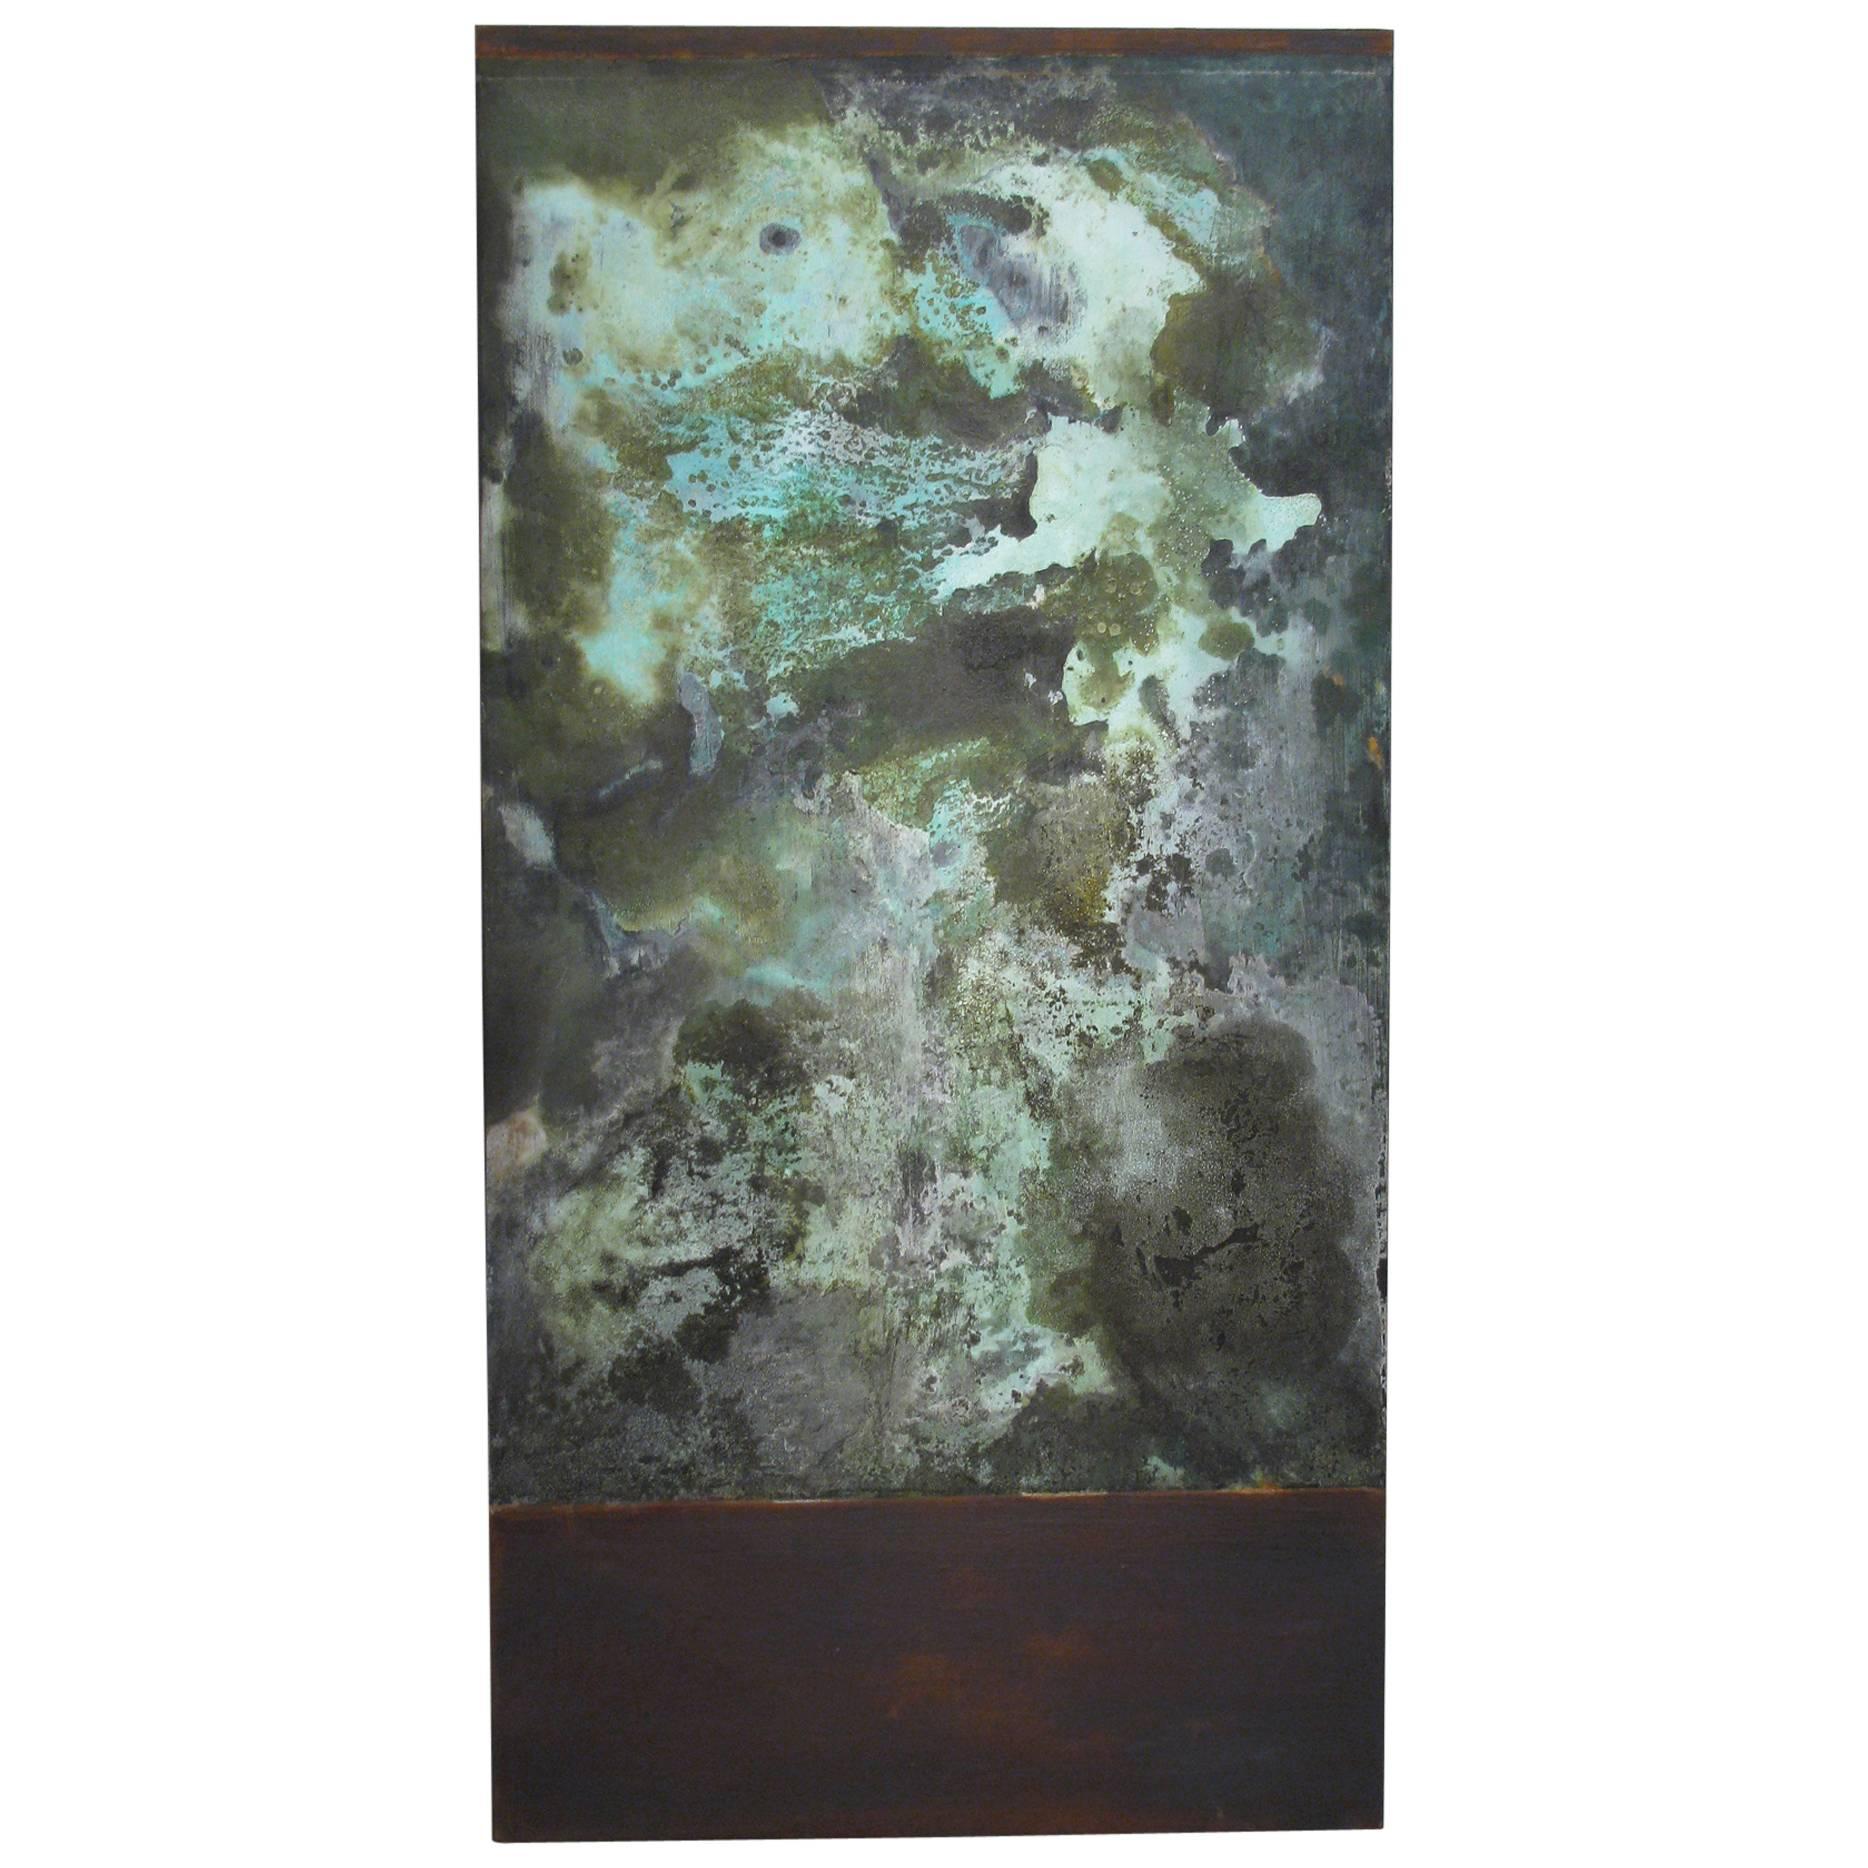 Oxidation Painting "Verbena" by Willie Little